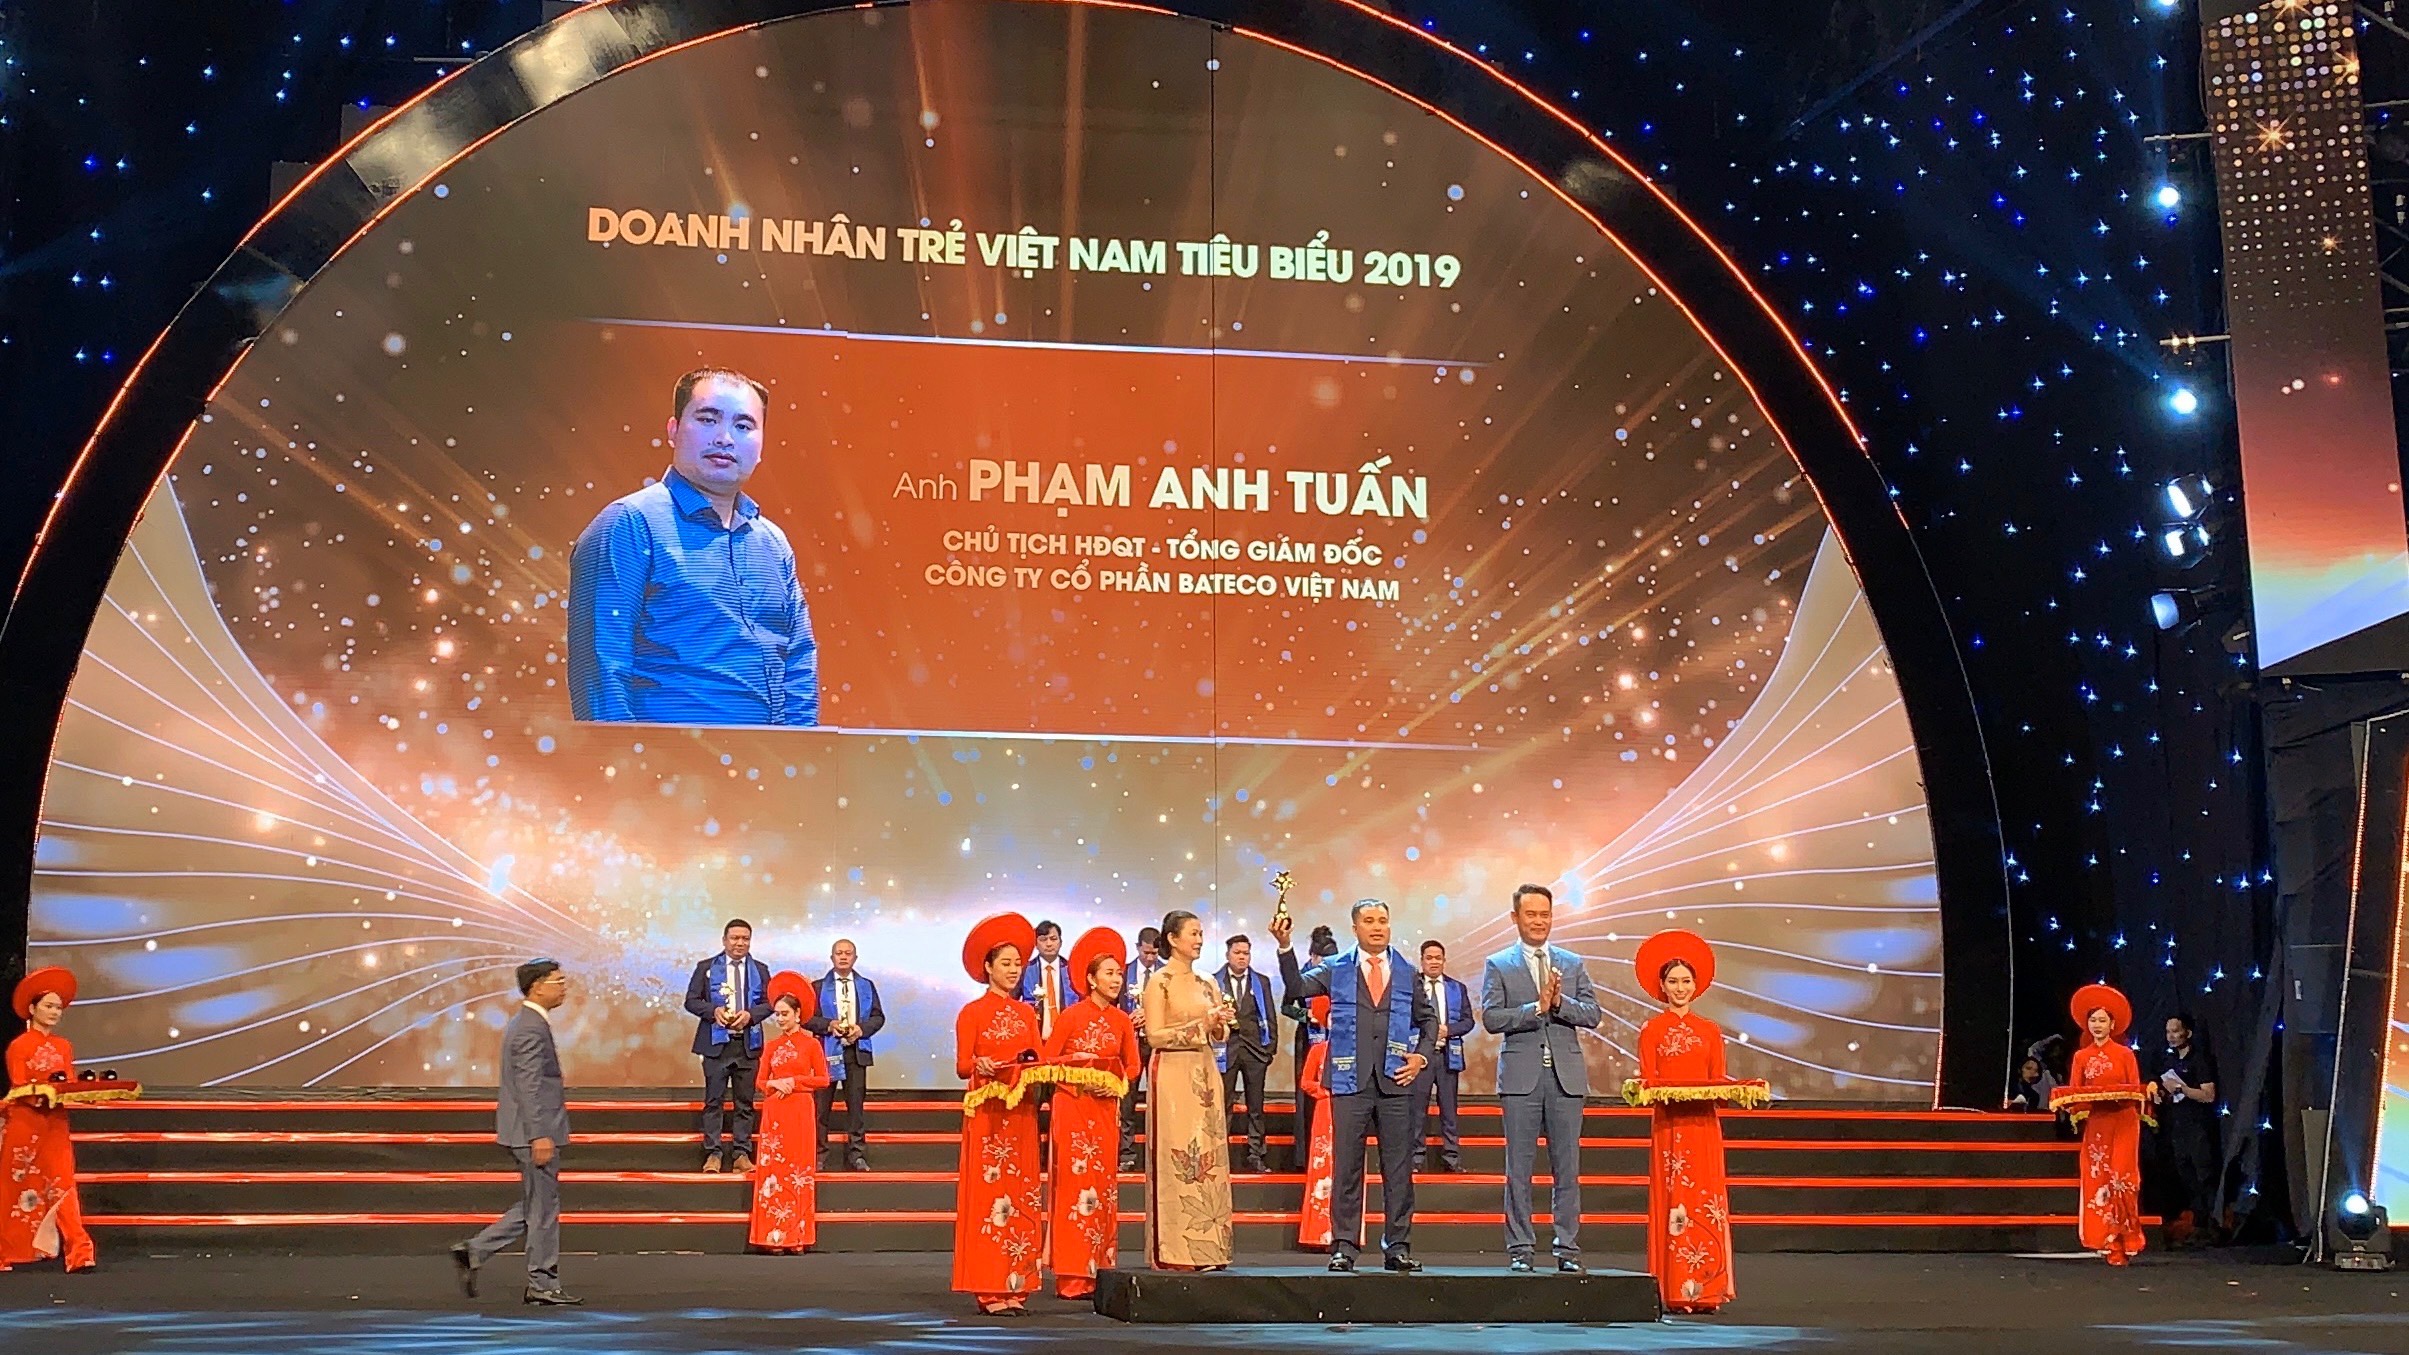 Overview of the Red Star Award – Typical Young Vietnamese Entrepreneur 2019